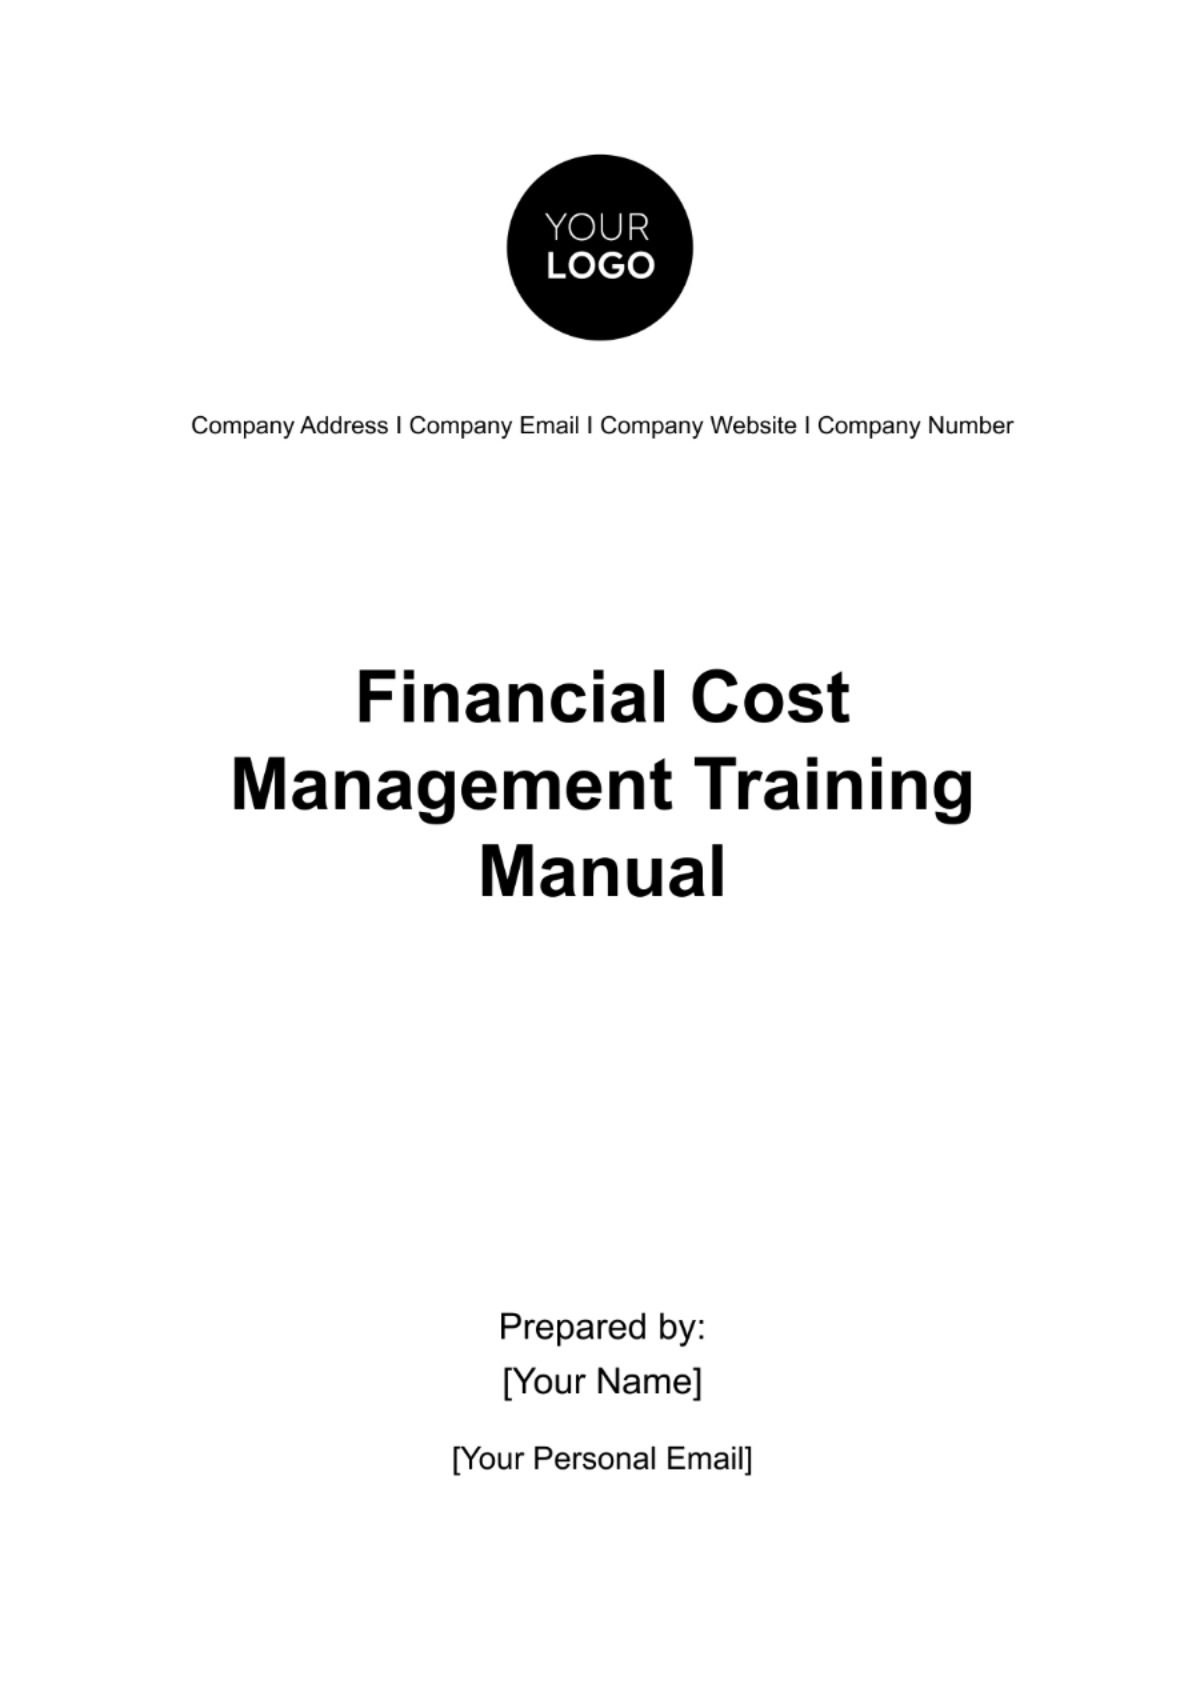 Financial Cost Management Training Manual Template